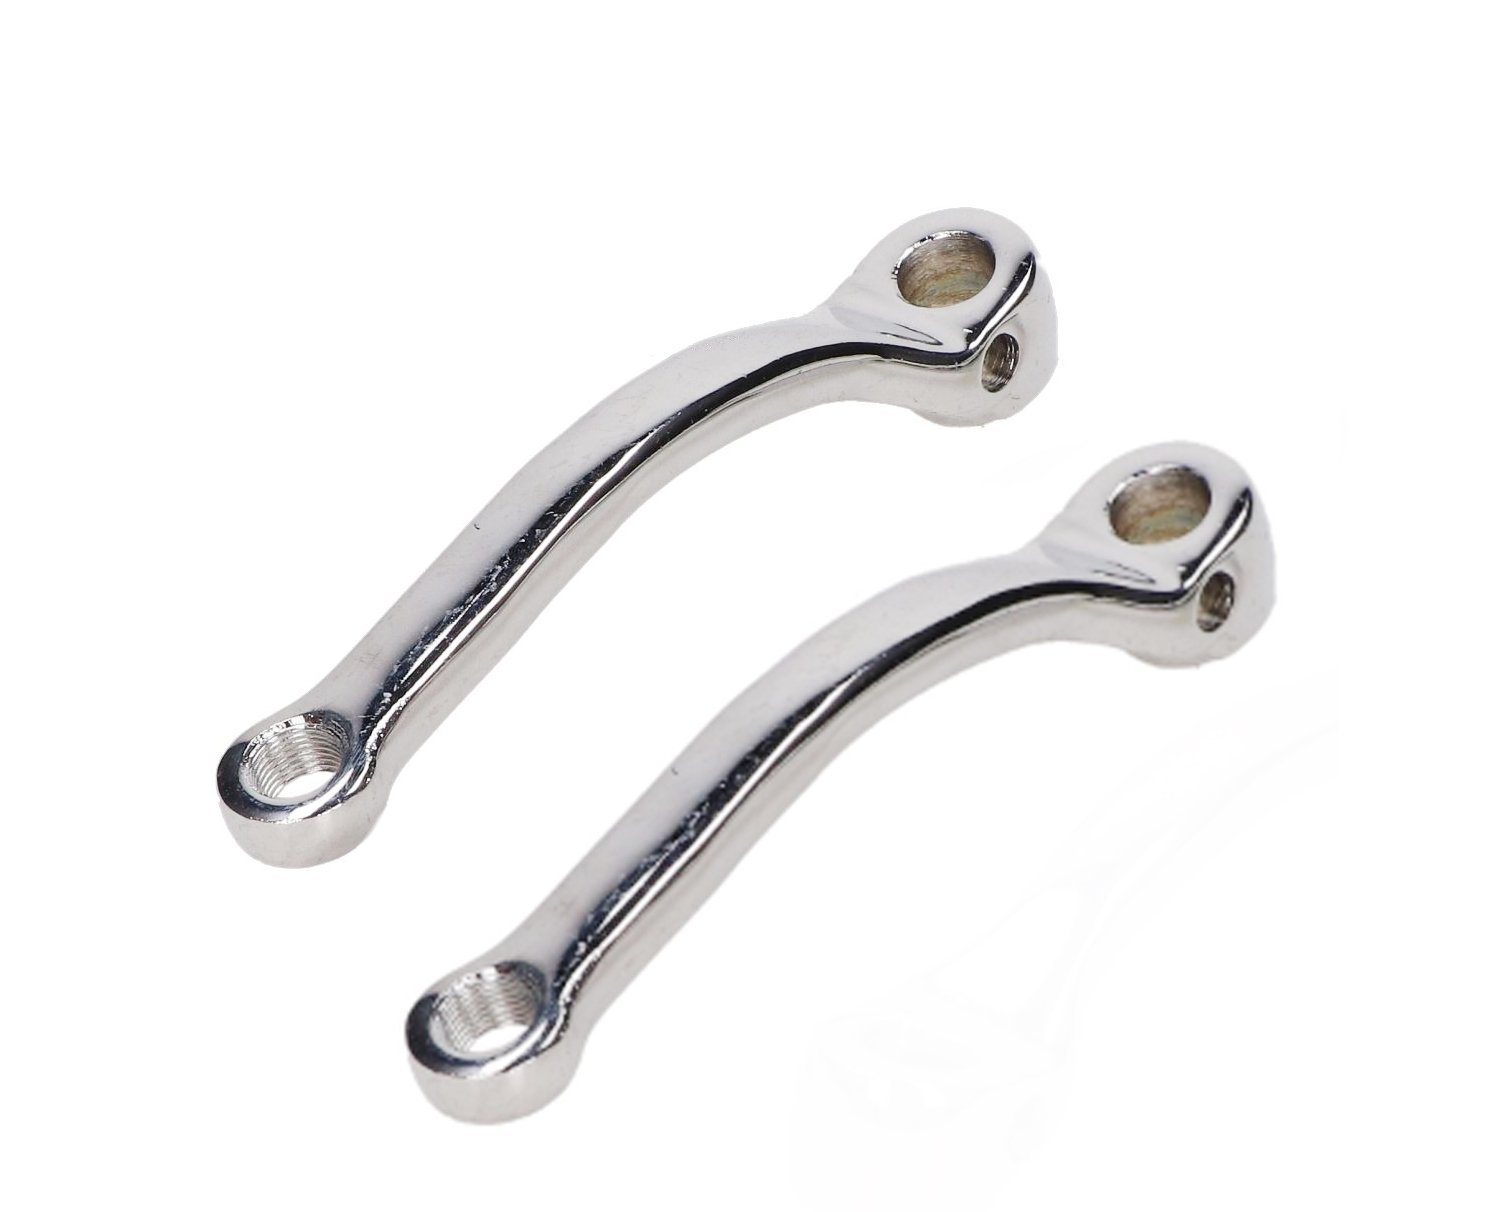 PUCH MAXI SACHS UNIVERSAL crank set puch maxi left / right chrome shaft - thread 155 mm 9/16 overall length crank 178 mm